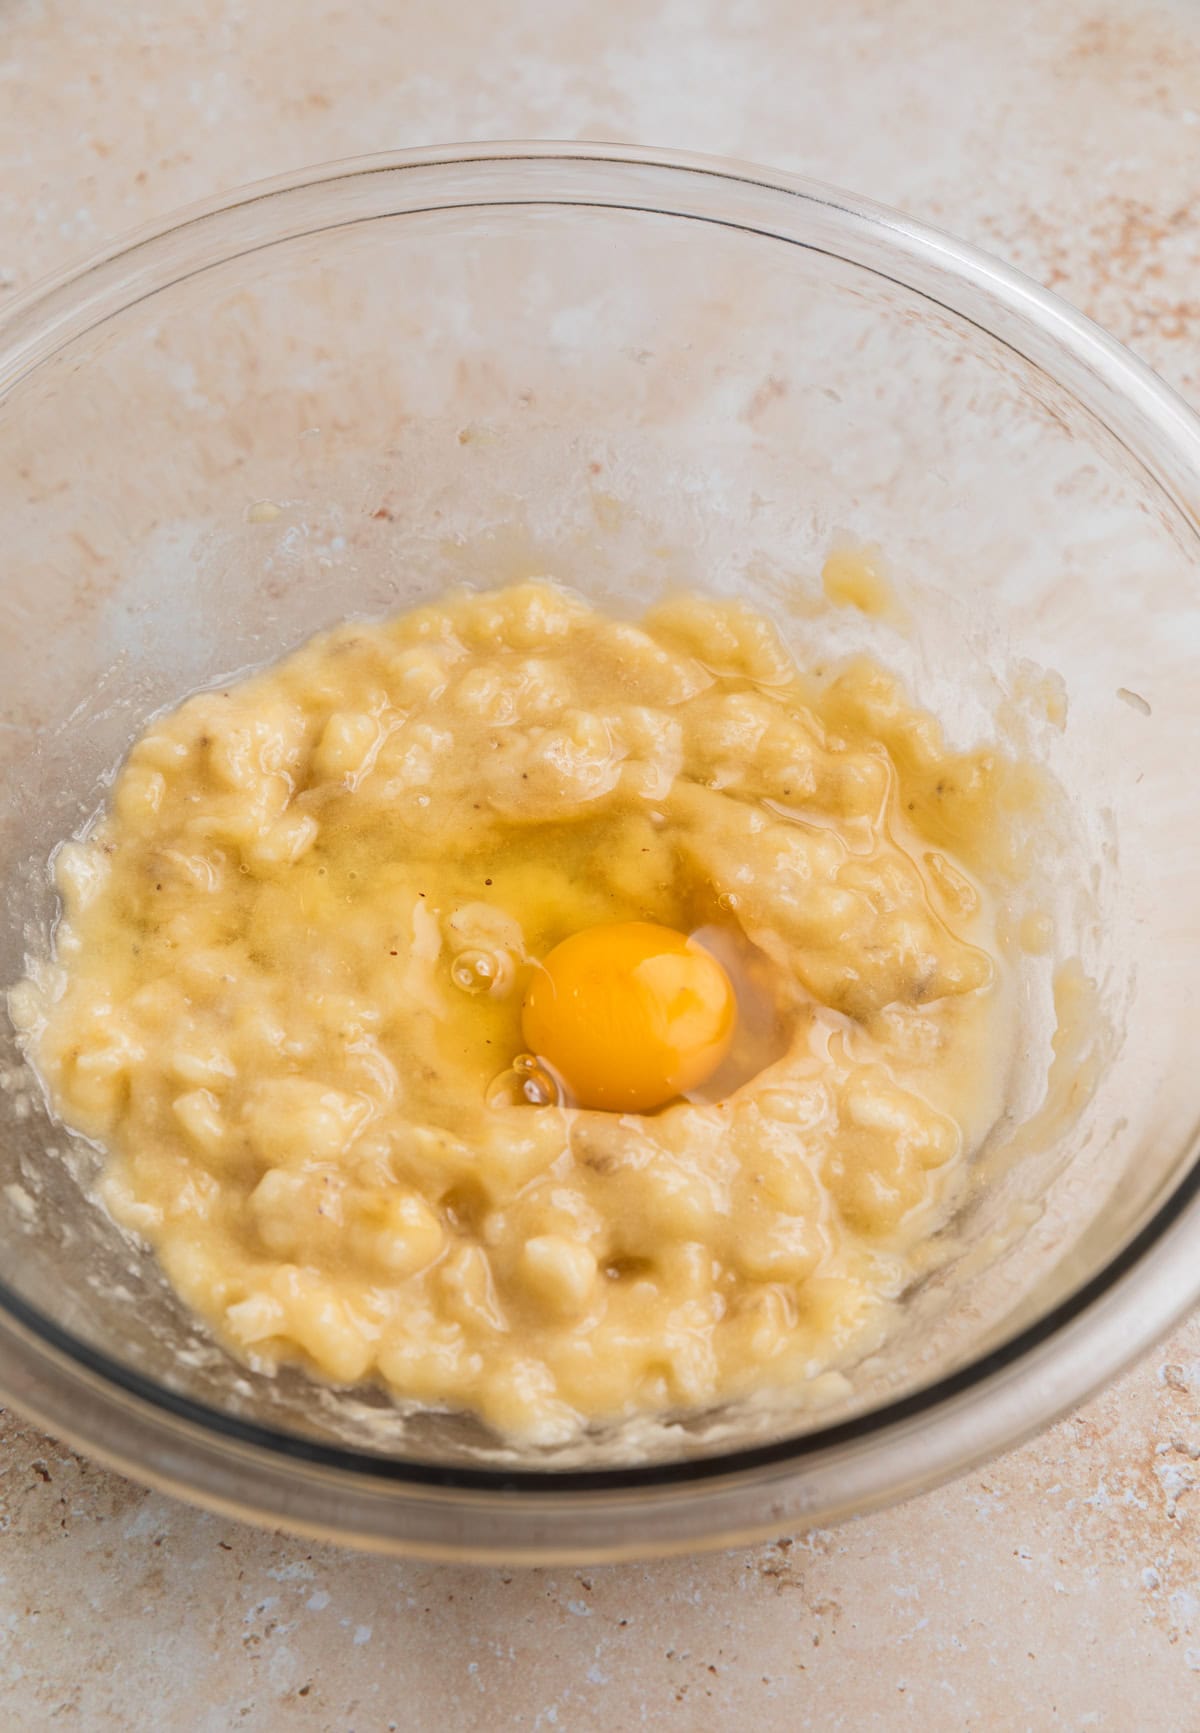 Mashed banana in mixing bowl with egg in it before whisking.